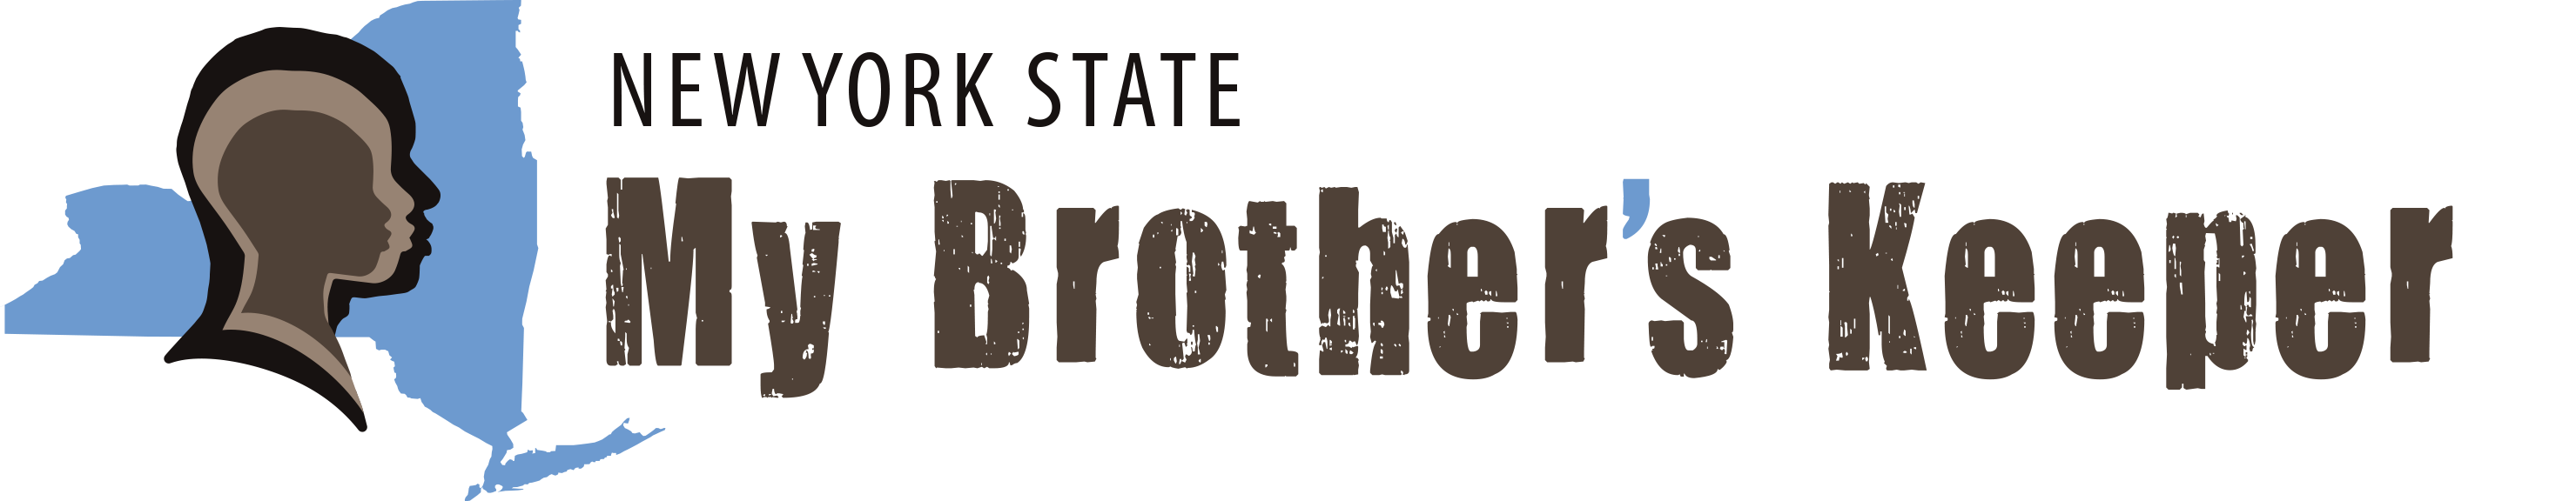 New York State My Brother's Keeper logo